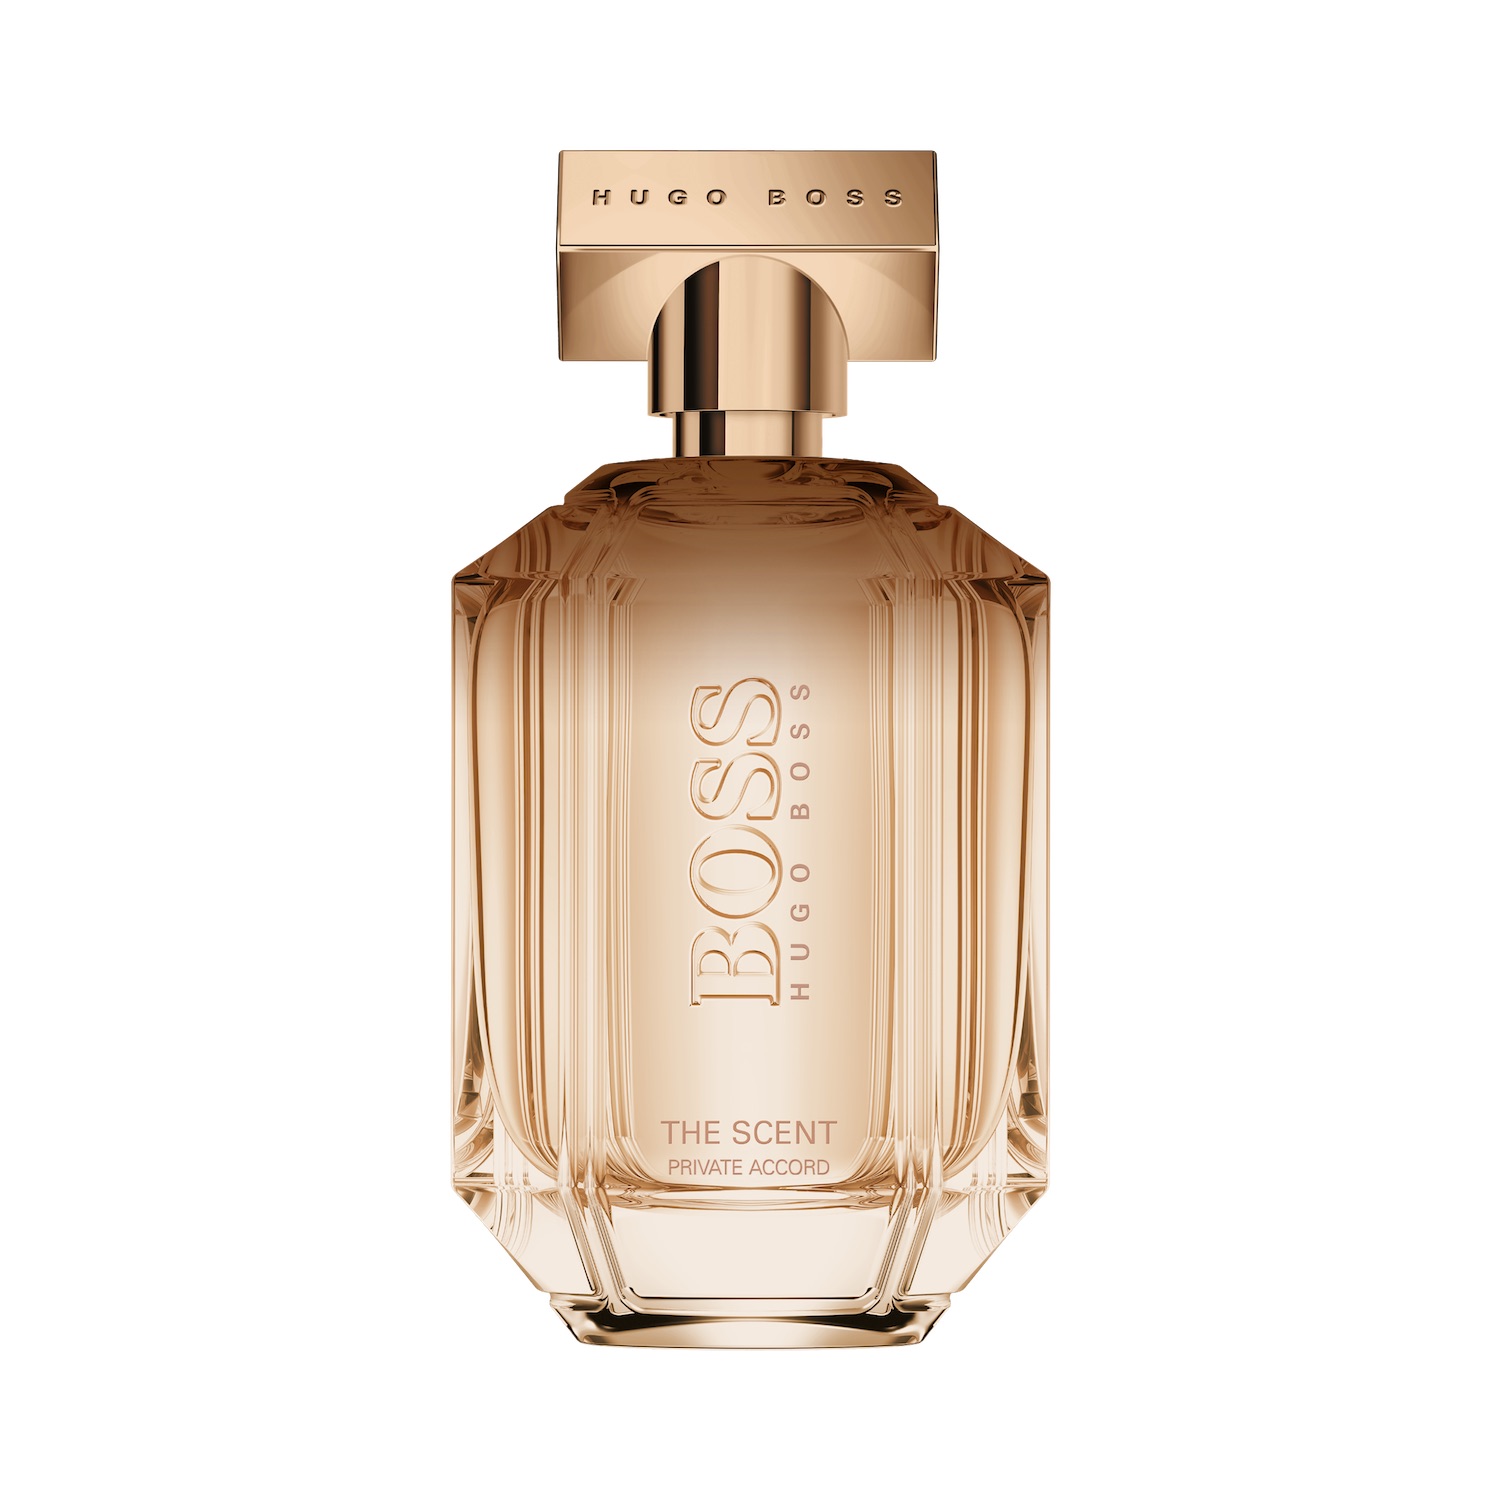 The Scent Private Accord by Hugo Boss has notes of cocoa and sweet tangerine